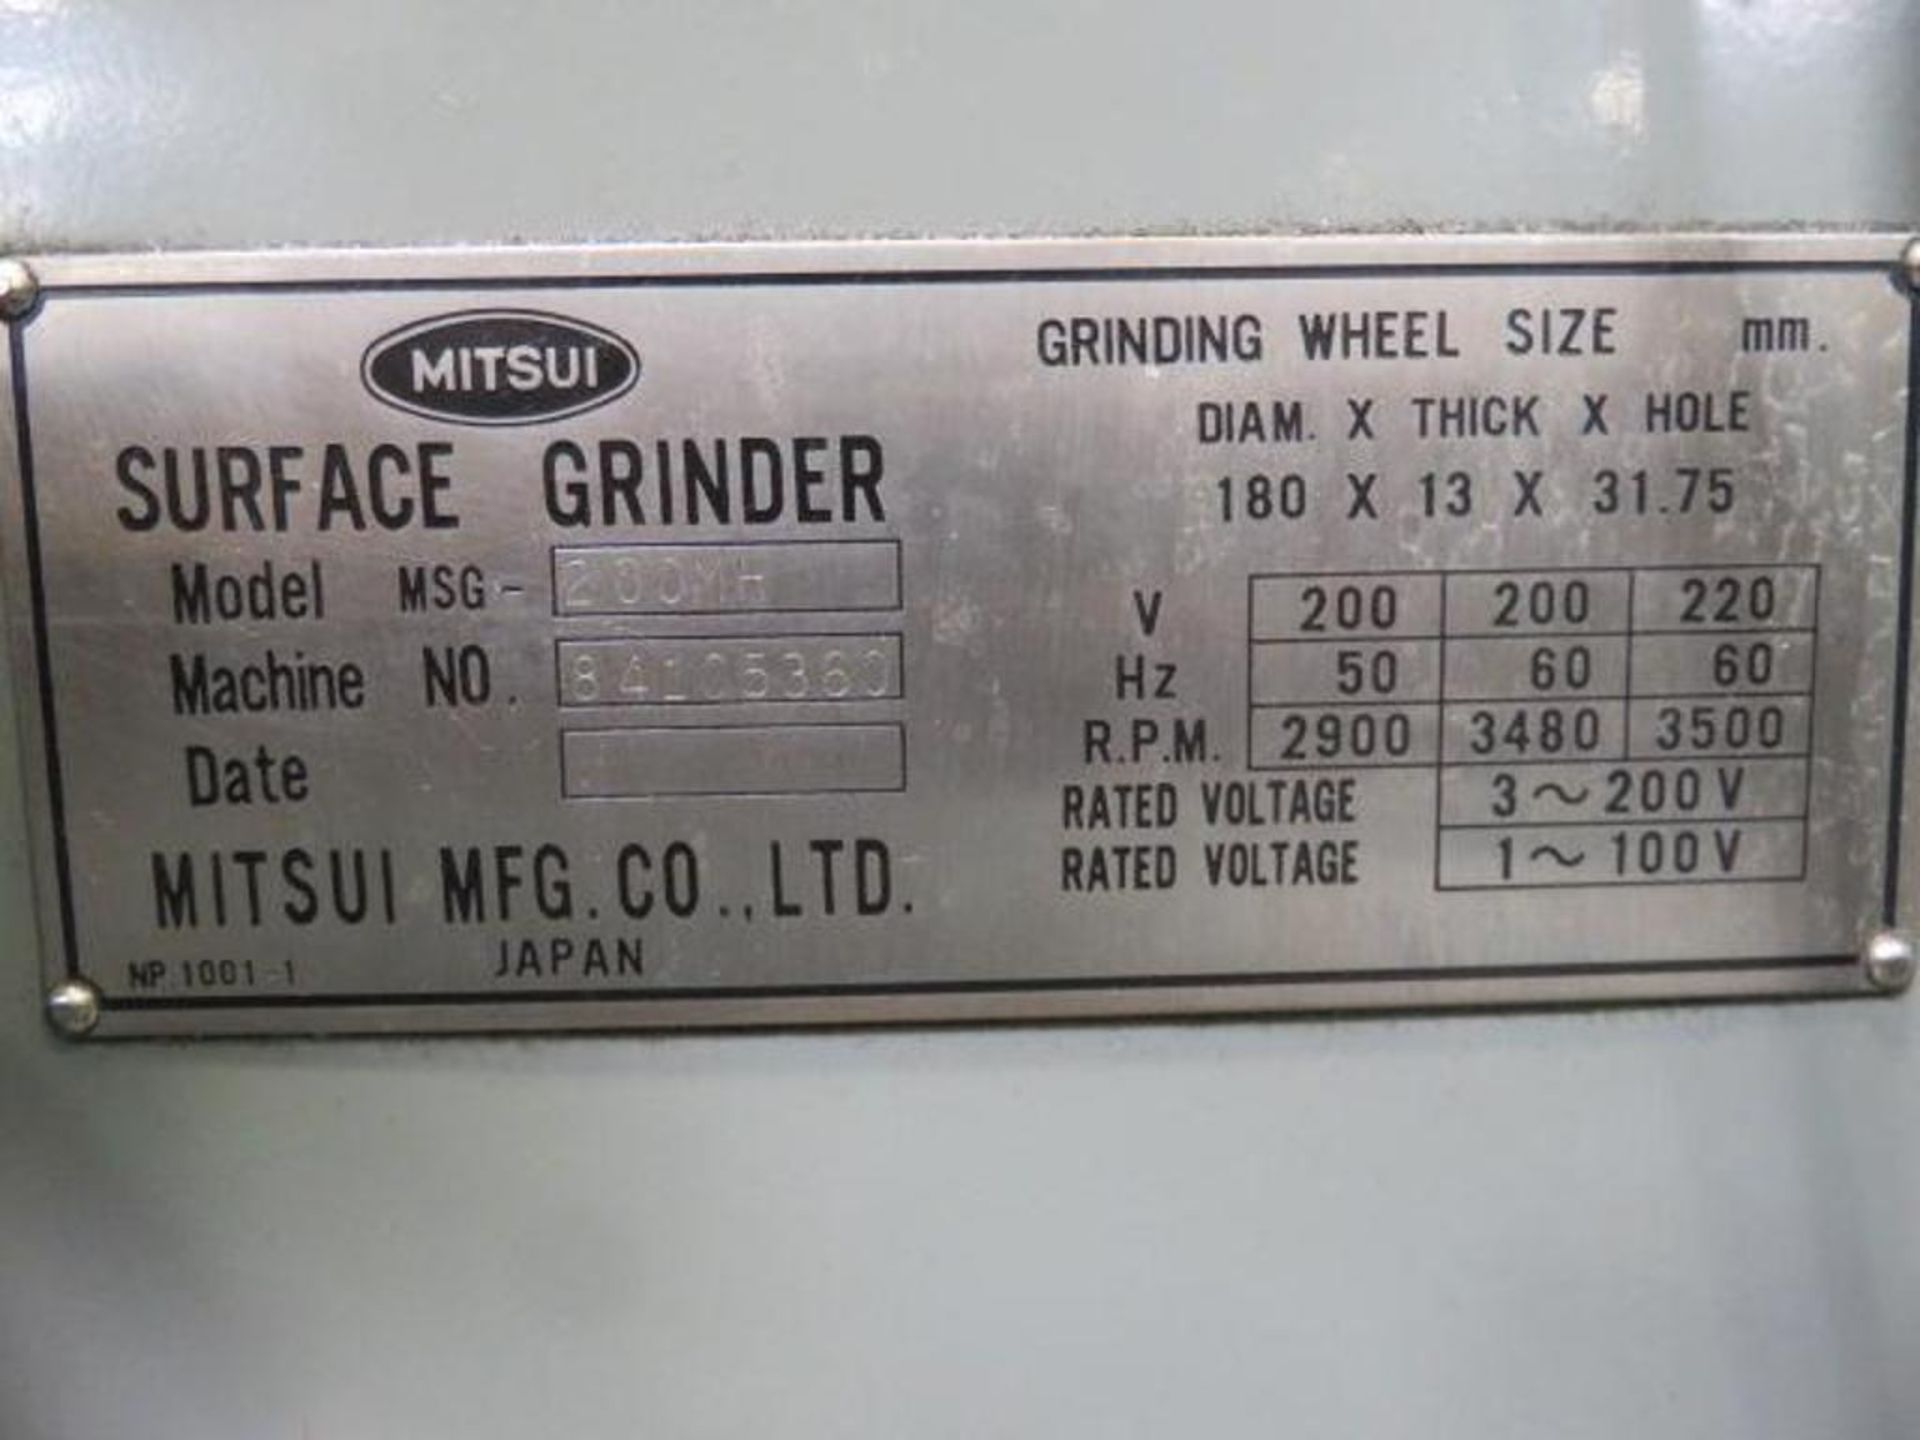 Mitsui 6 in. x 12 in. Hand Feed Surface Grinder Model MSG-200MH, S/N 84105360 (1984), Electro-Matic - Image 2 of 2